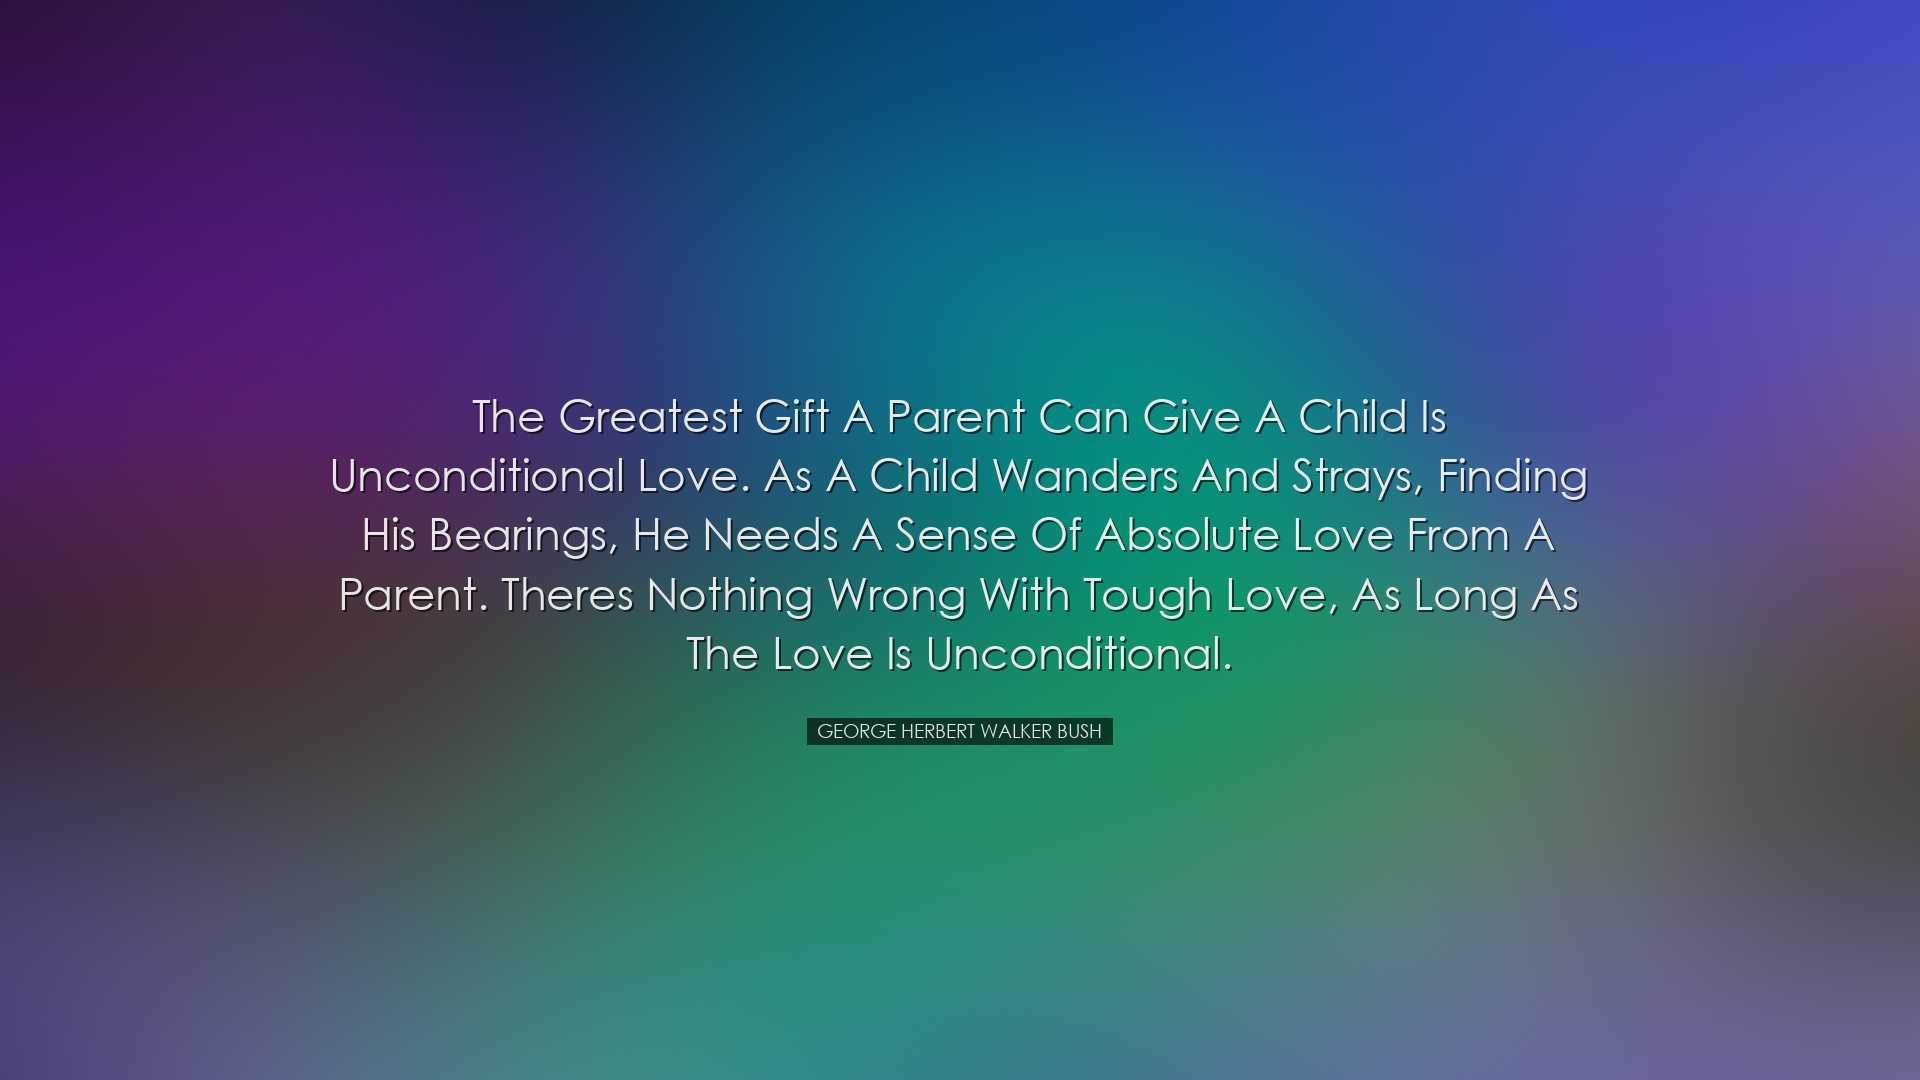 The greatest gift a parent can give a child is unconditional love.